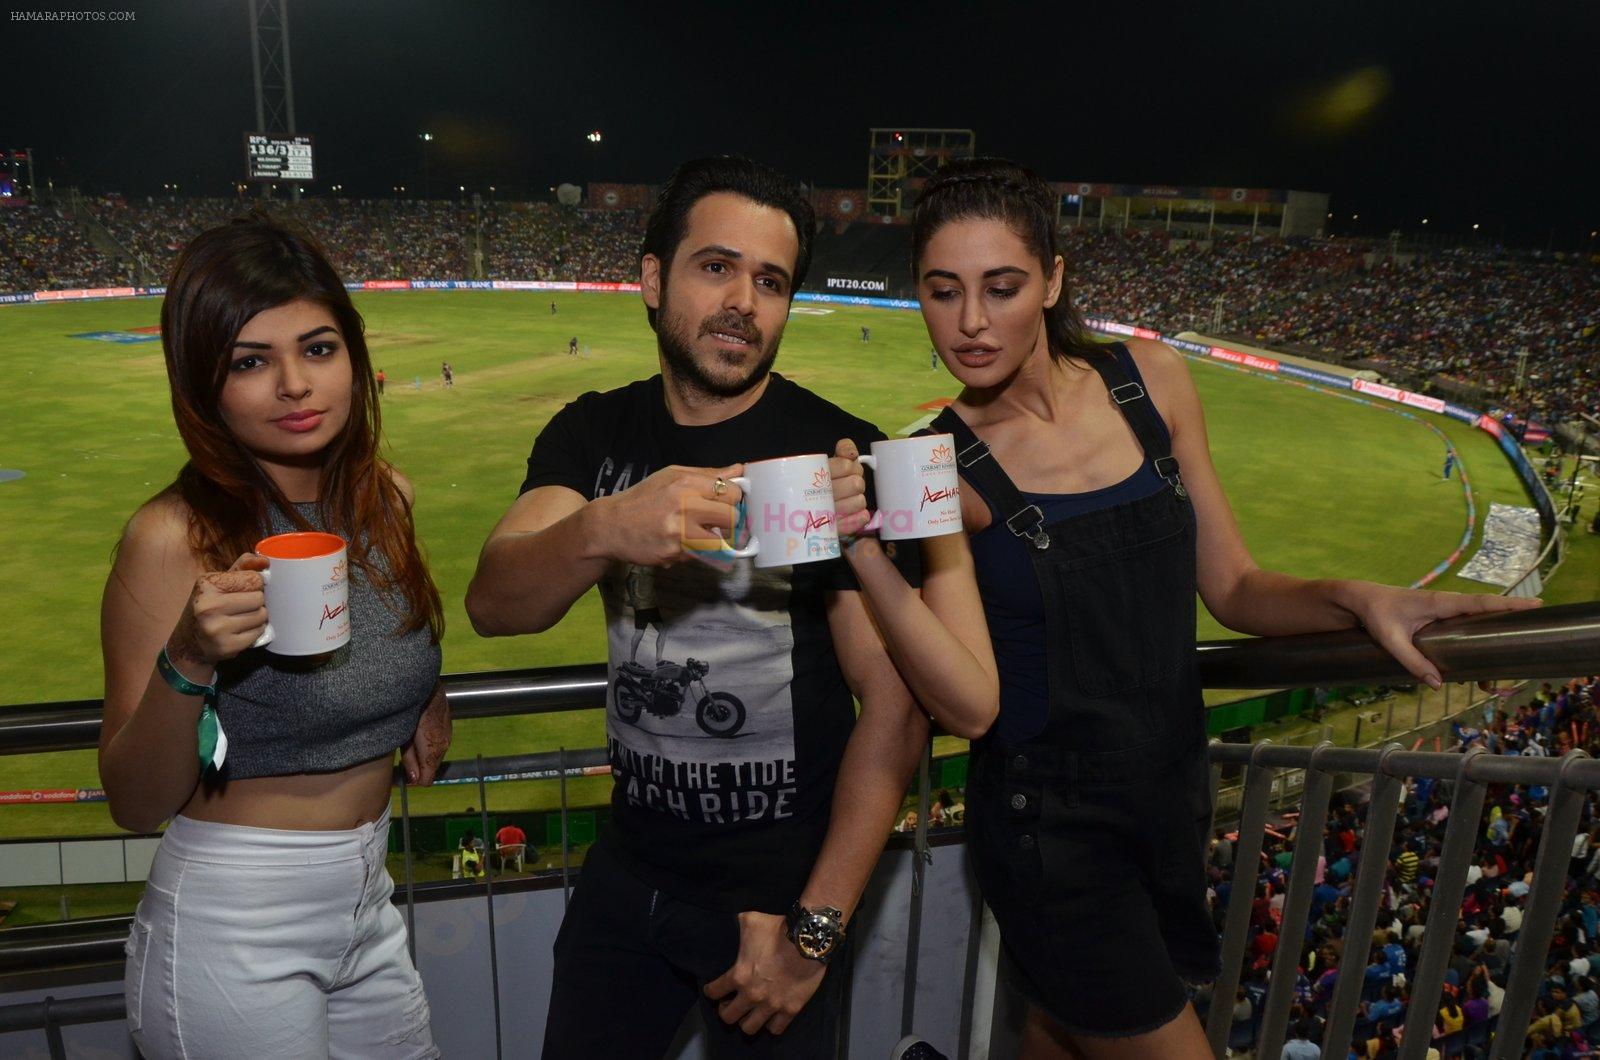 christina bharwani, emran hashmi and nargis fakhri  at Azhar promotions in association with Gourmet Renaissance at IPL match in Pune on 9th May 2016